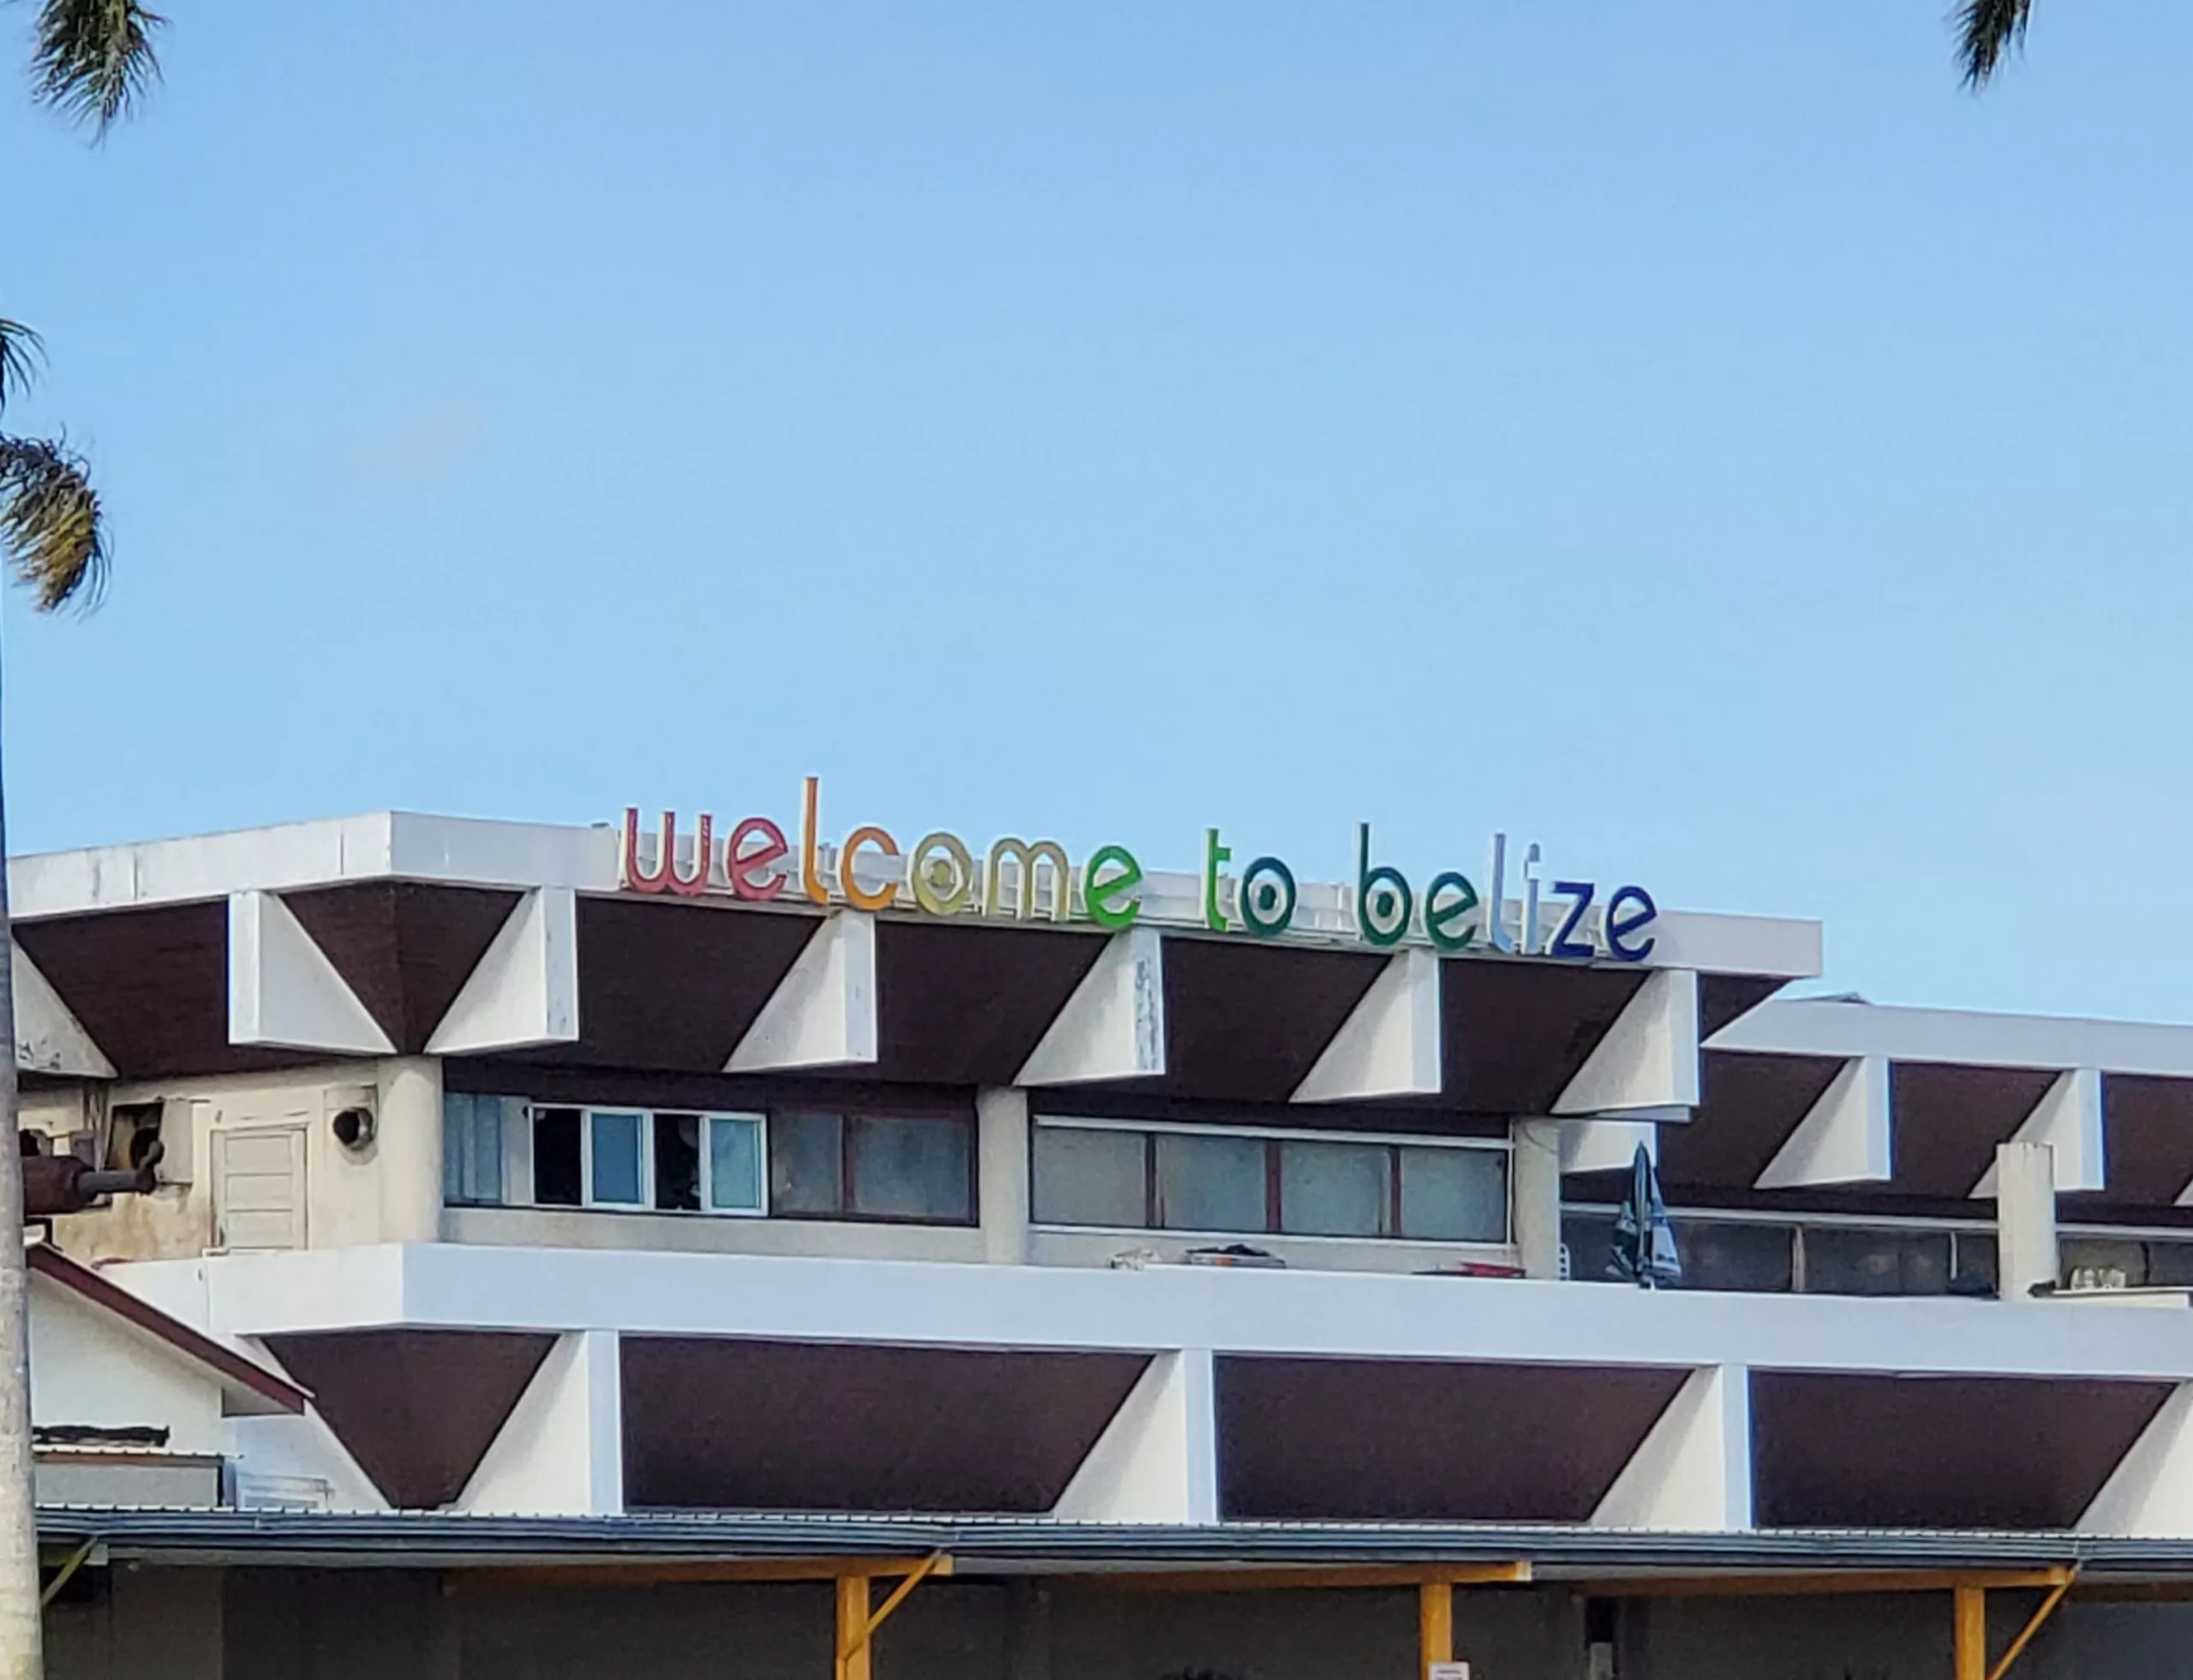 3 weeks in Belize, So you are moving to Belize, Welcome to Belize, Belize airport